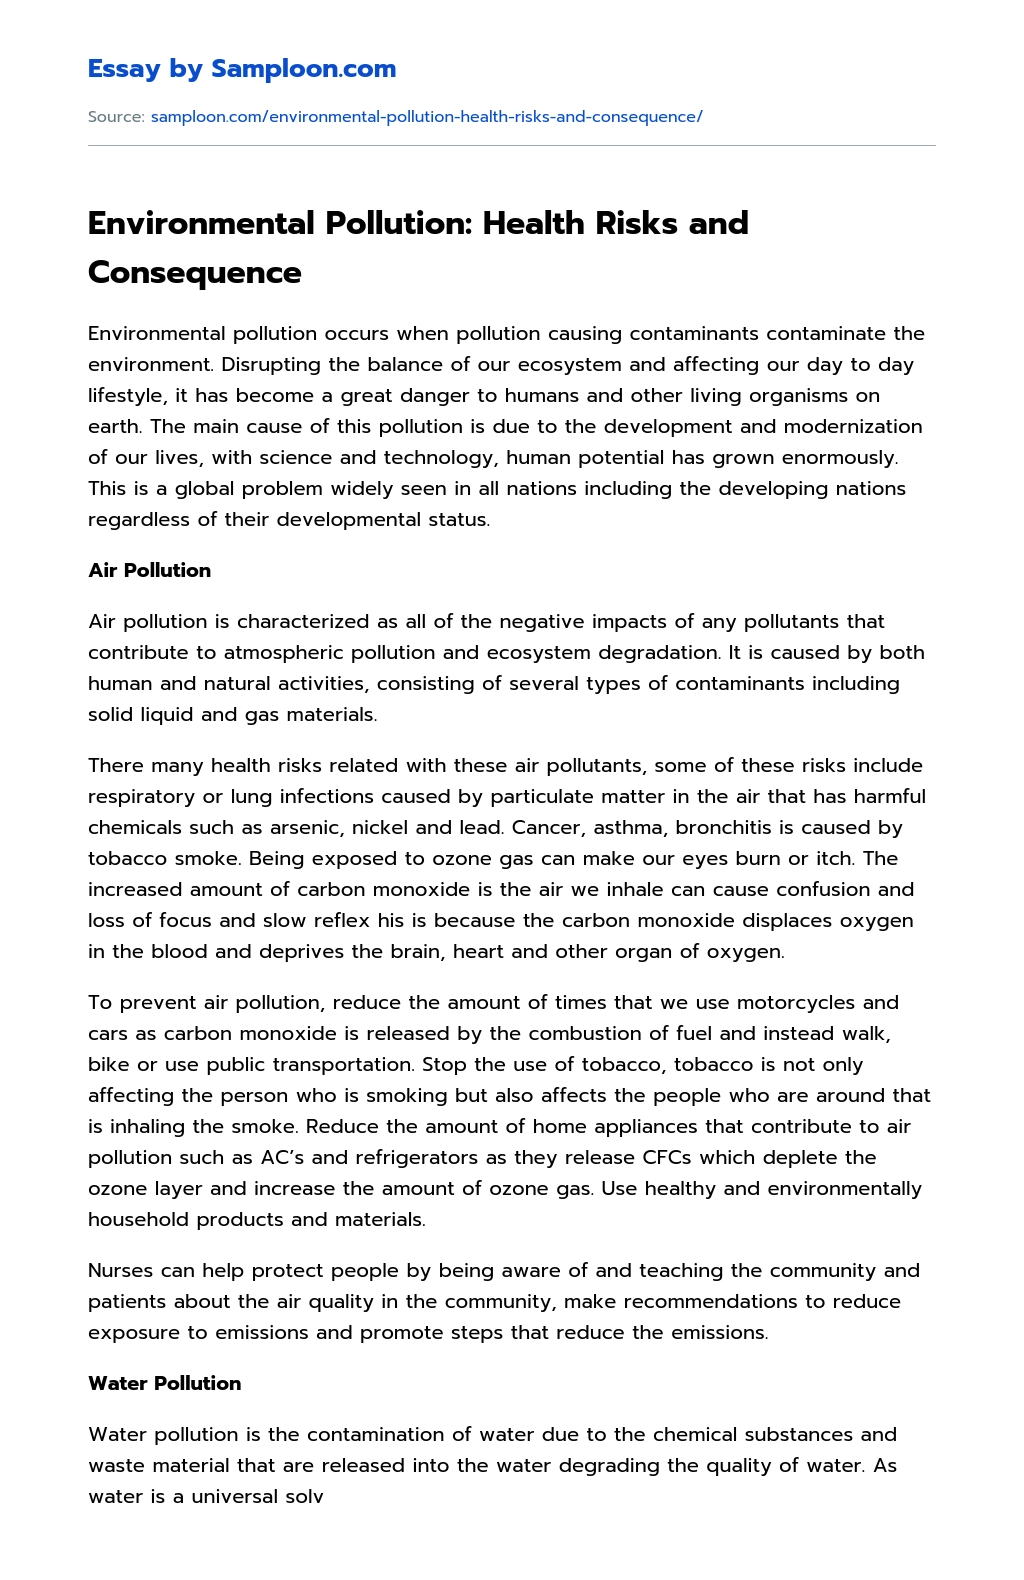 Environmental Pollution: Health Risks and Consequence Cause And Effect Essay essay